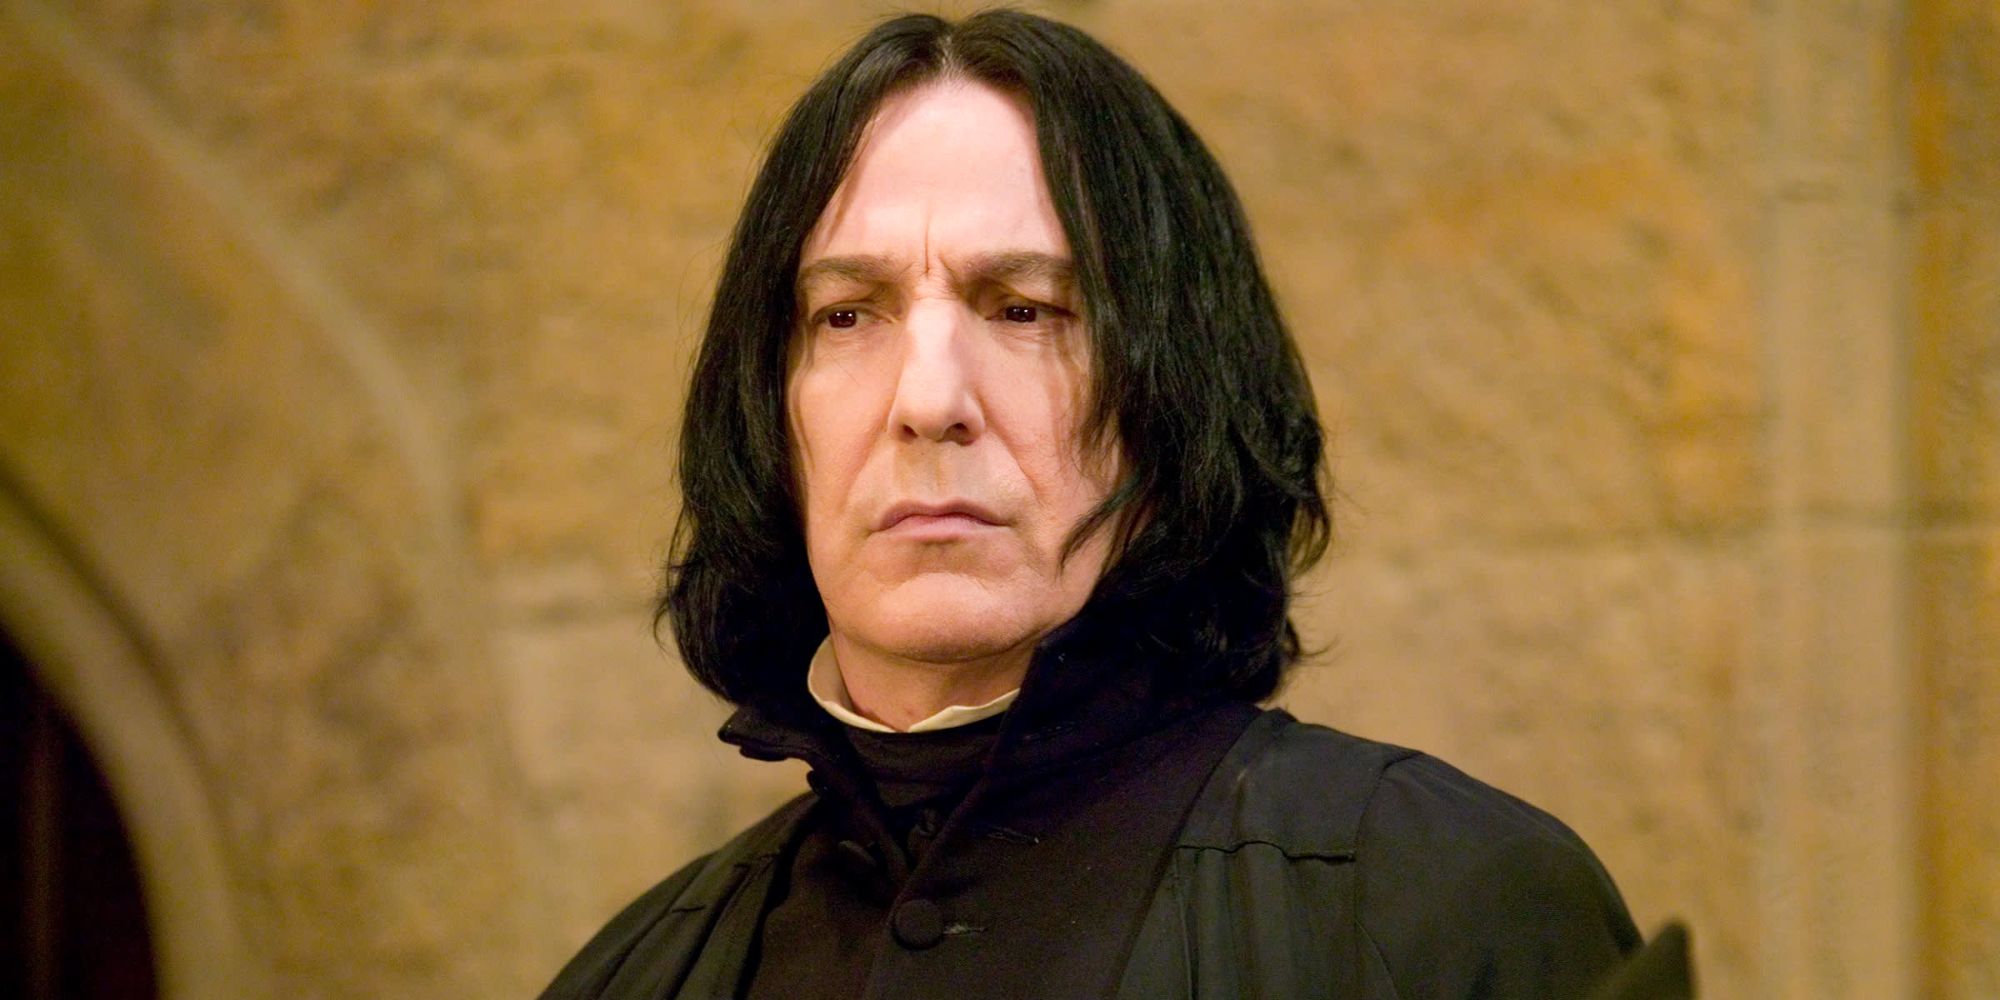 An image of Alan Rickman as Severus Snape in the Harry Potter movies